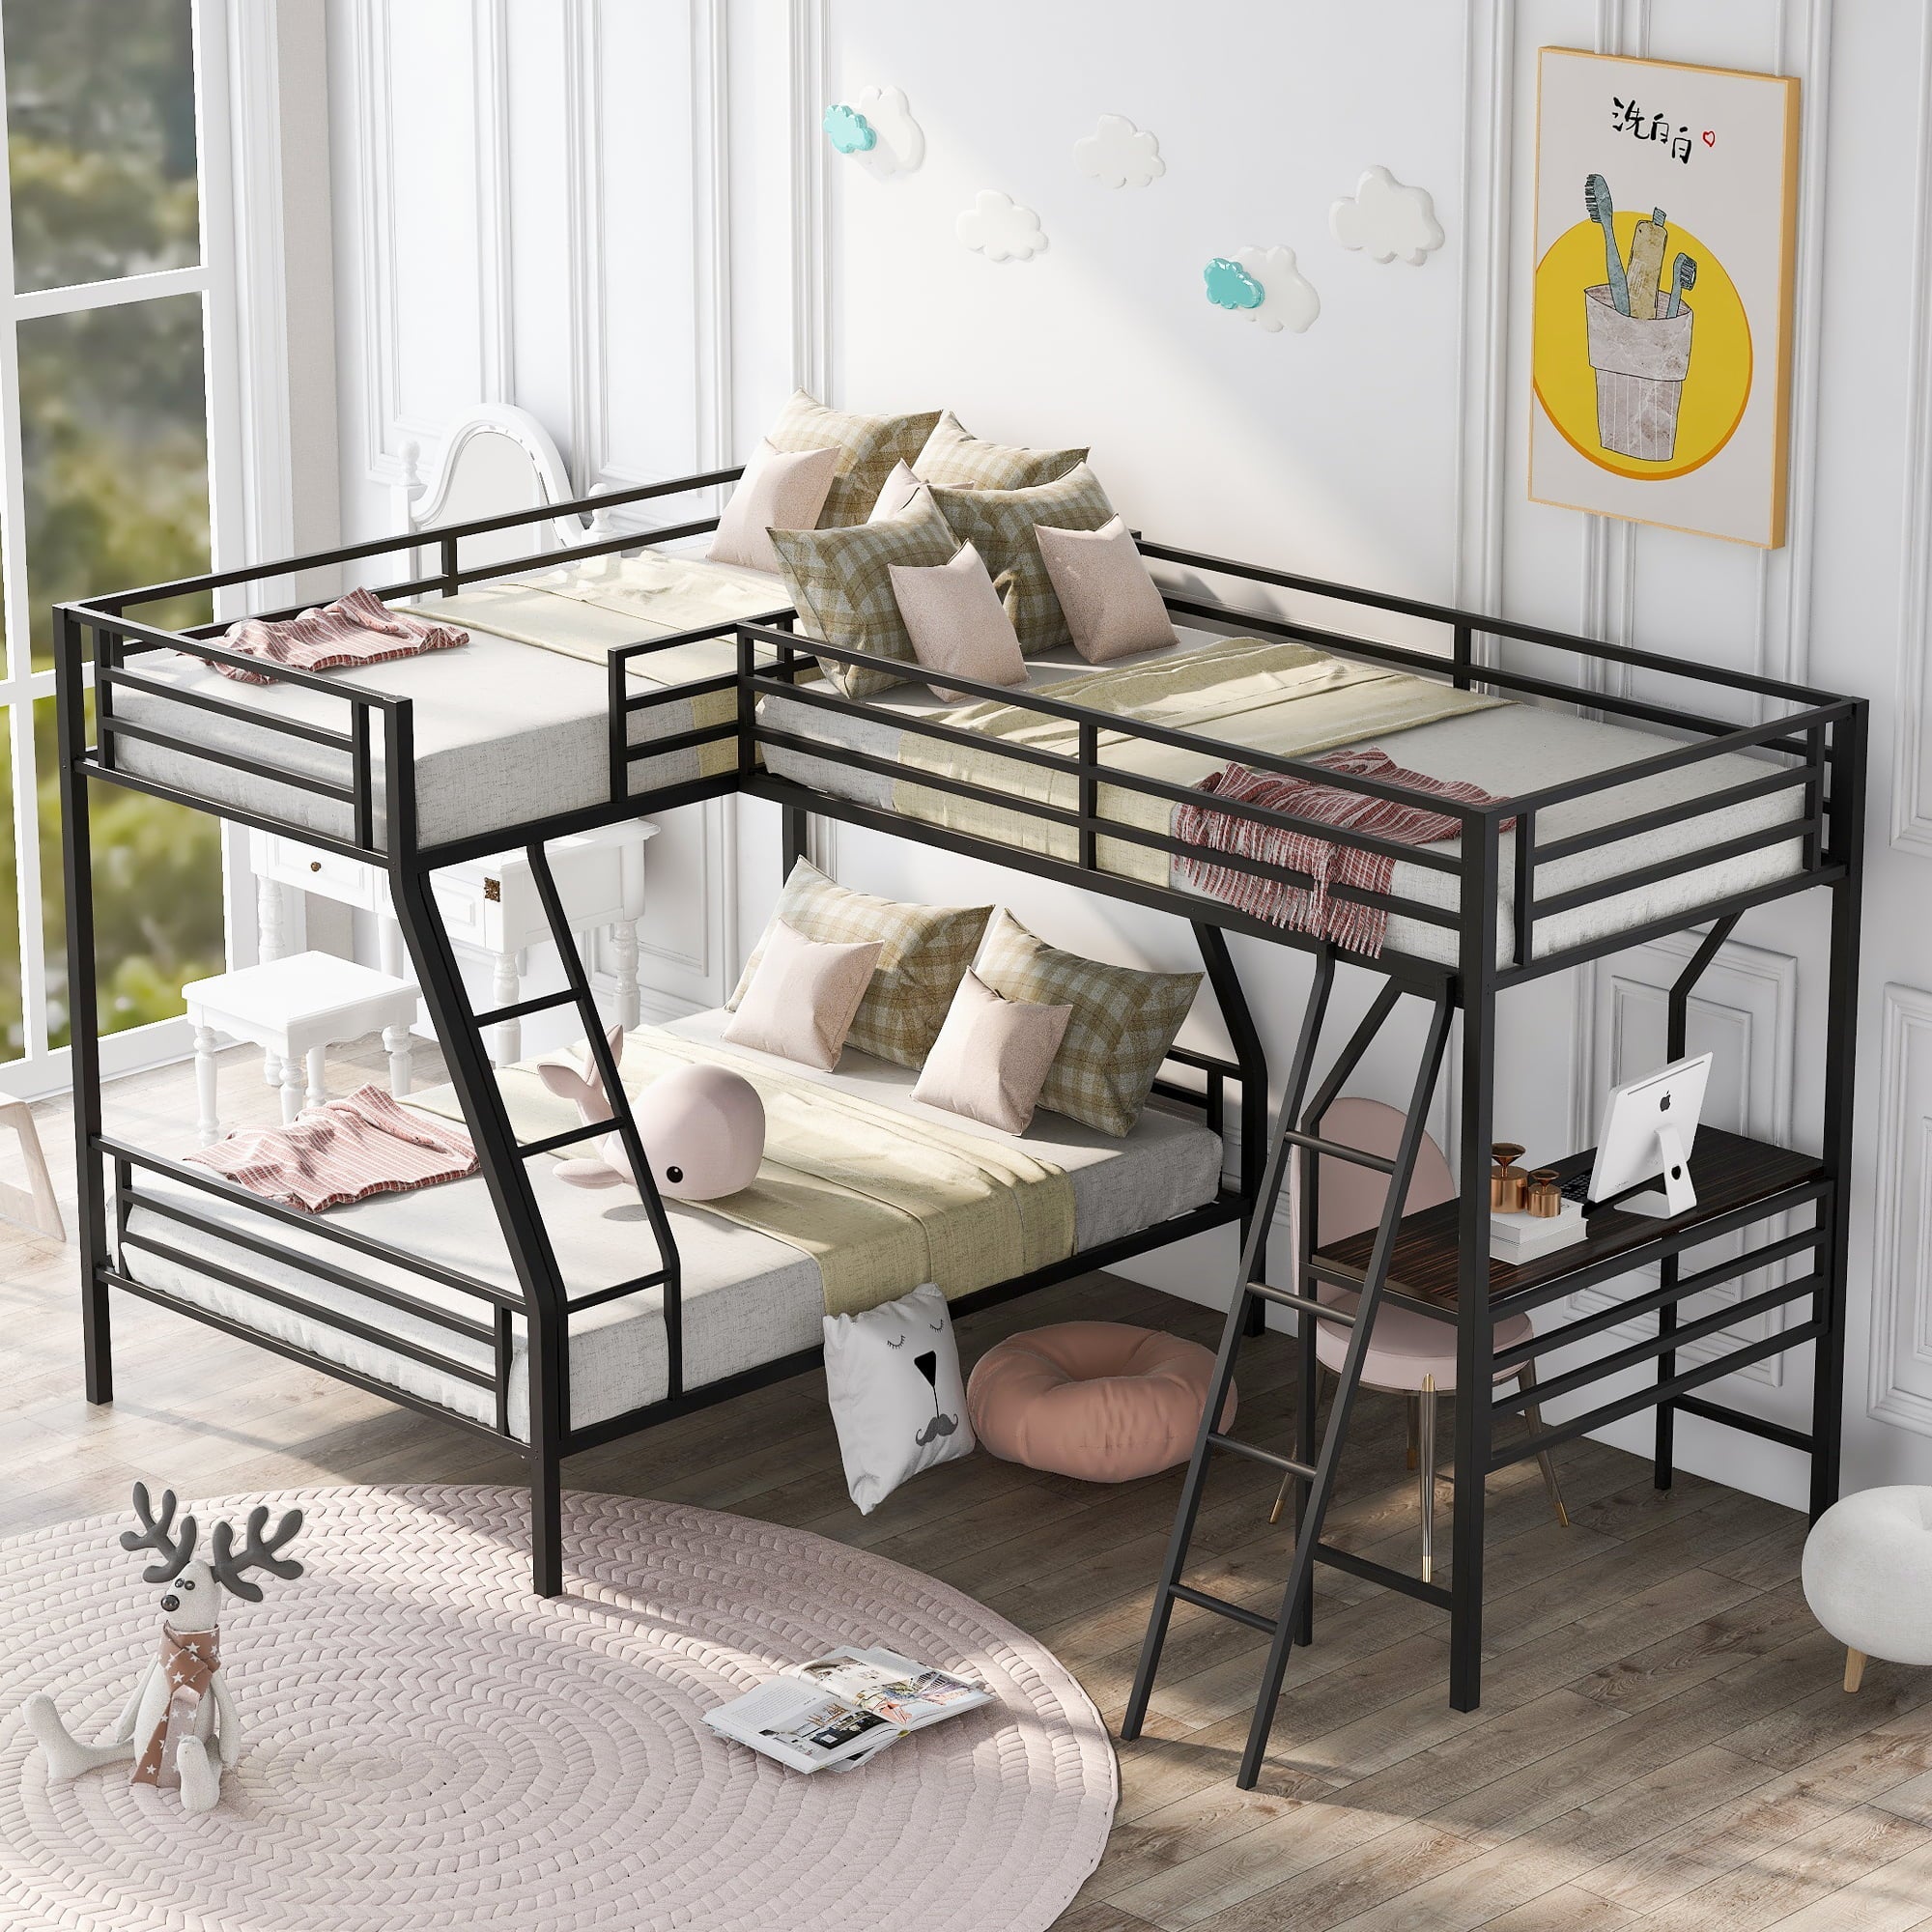 Euroco Twin L-Shaped Metal Bunk Bed with Built-in Study Desk for Kids' Bedroom, Black